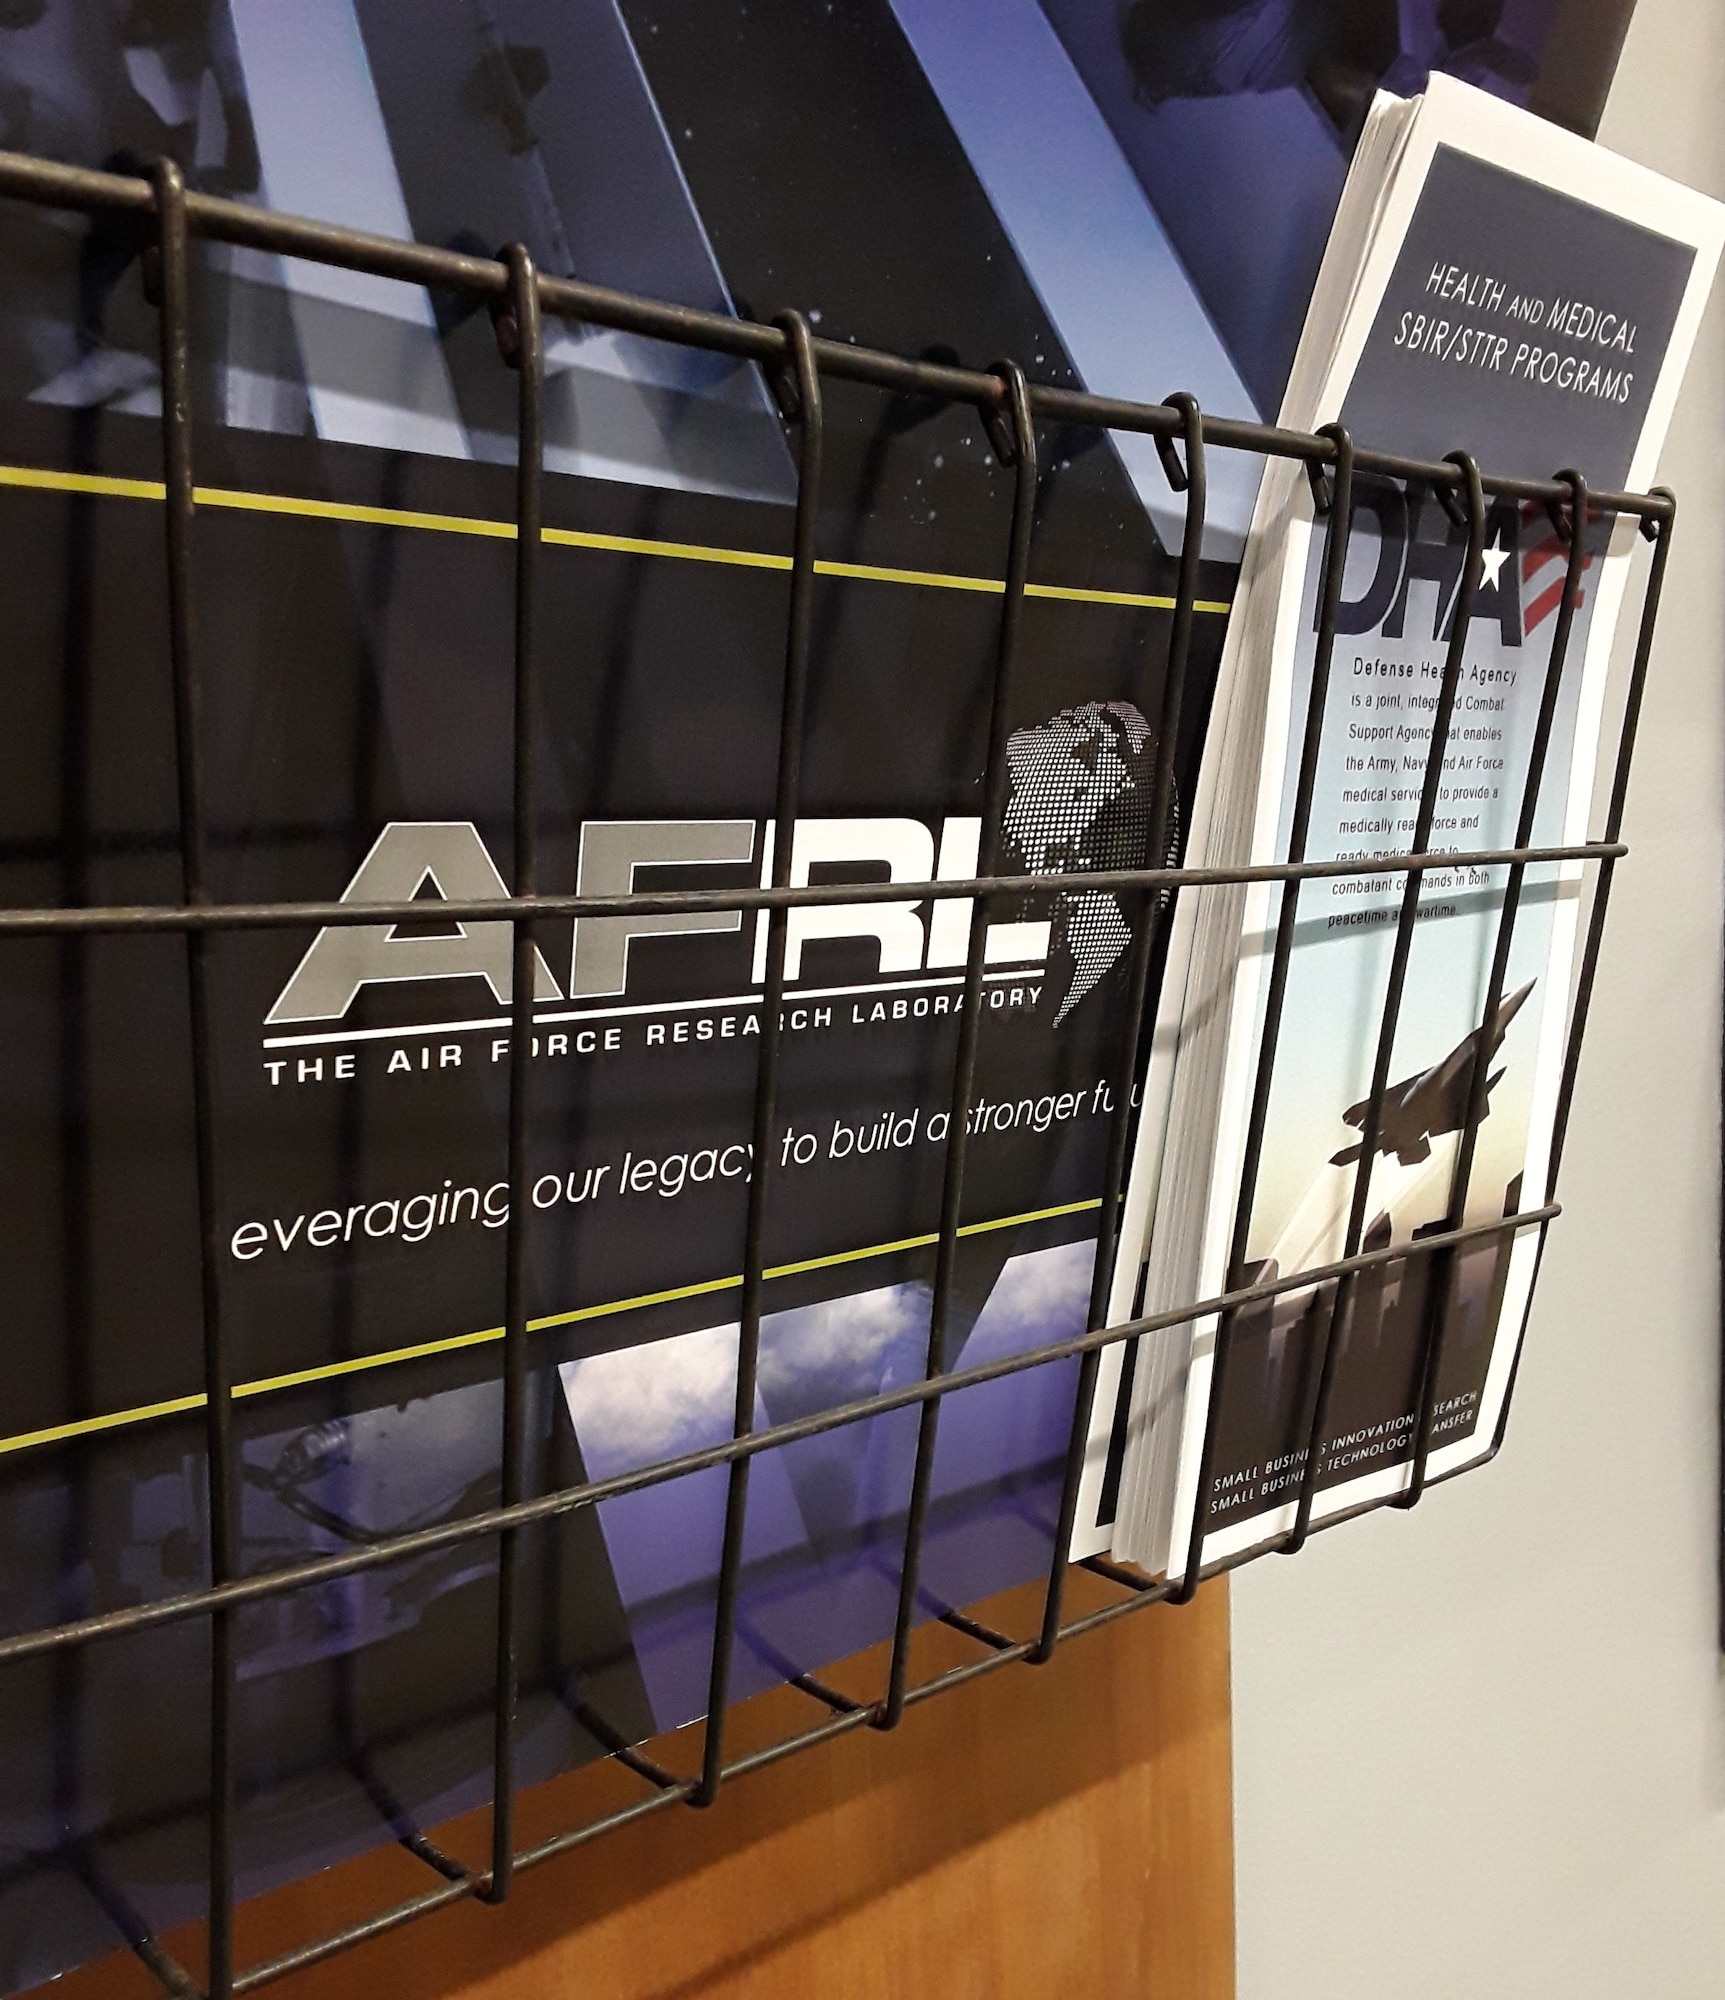 Marketing materials are displayed at the Wright Brothers Institute's Small business Hub in downtown Dayton during the inaugural Physiological Episodes Mitigation Technology Summit and Industry Day Dec. 17-18.